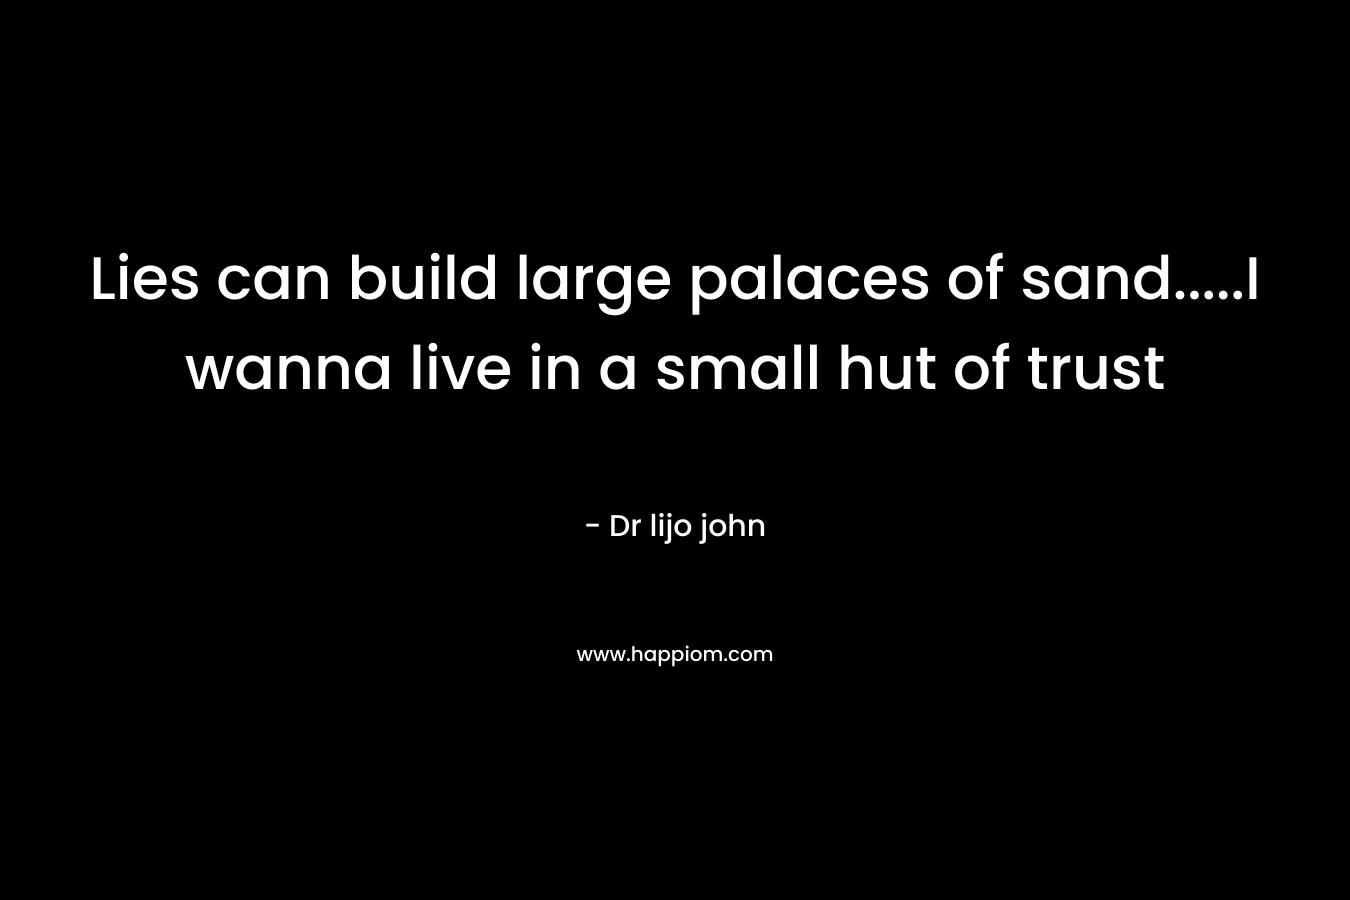 Lies can build large palaces of sand.....I wanna live in a small hut of trust